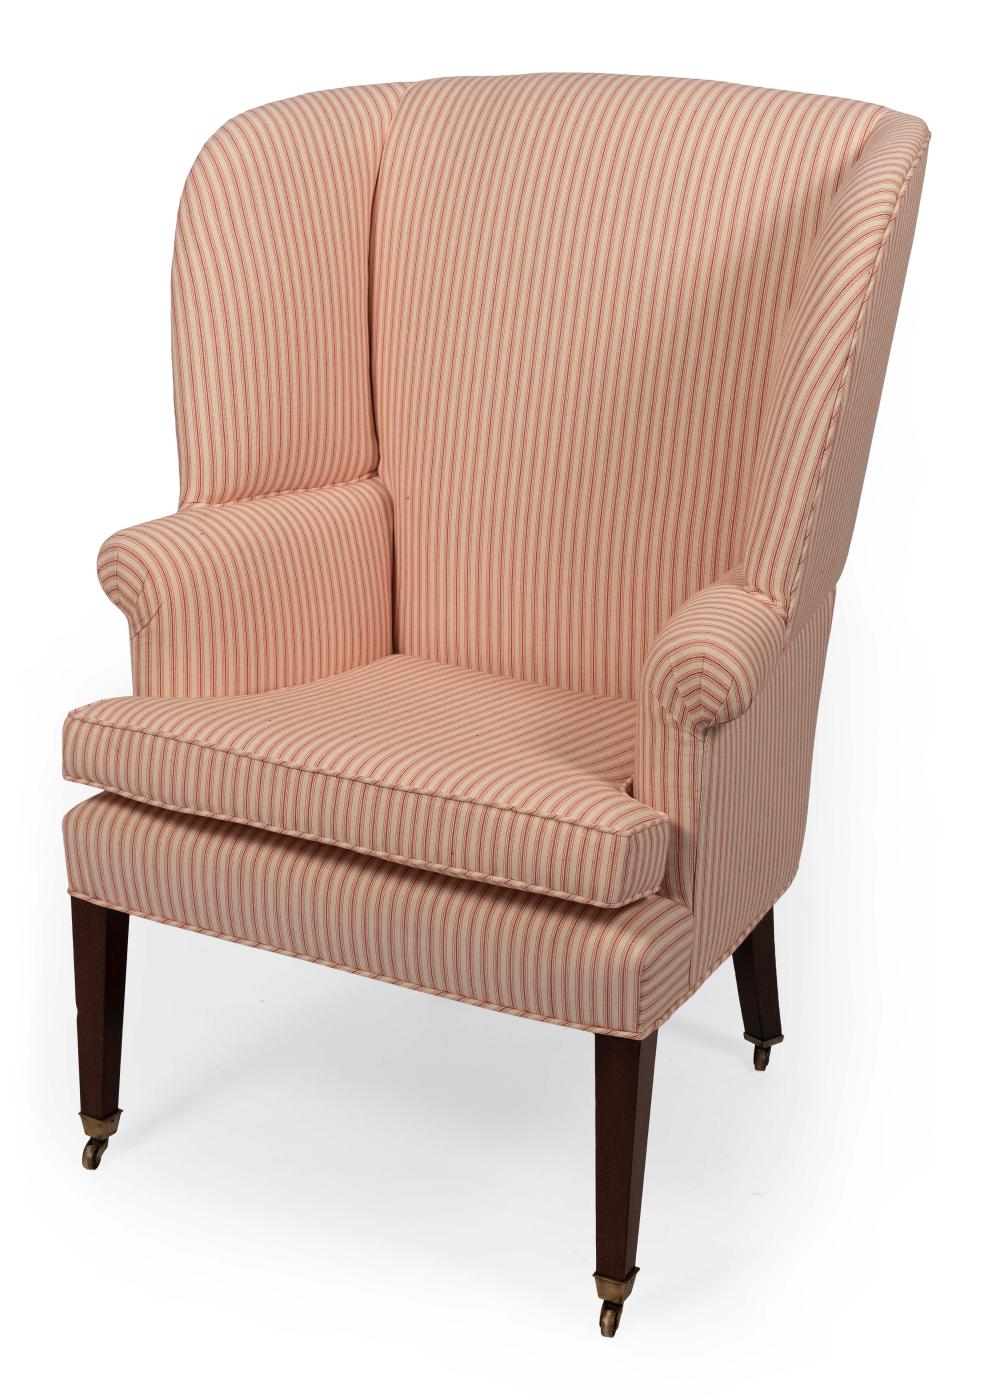 FEDERAL-STYLE WING CHAIR EARLY